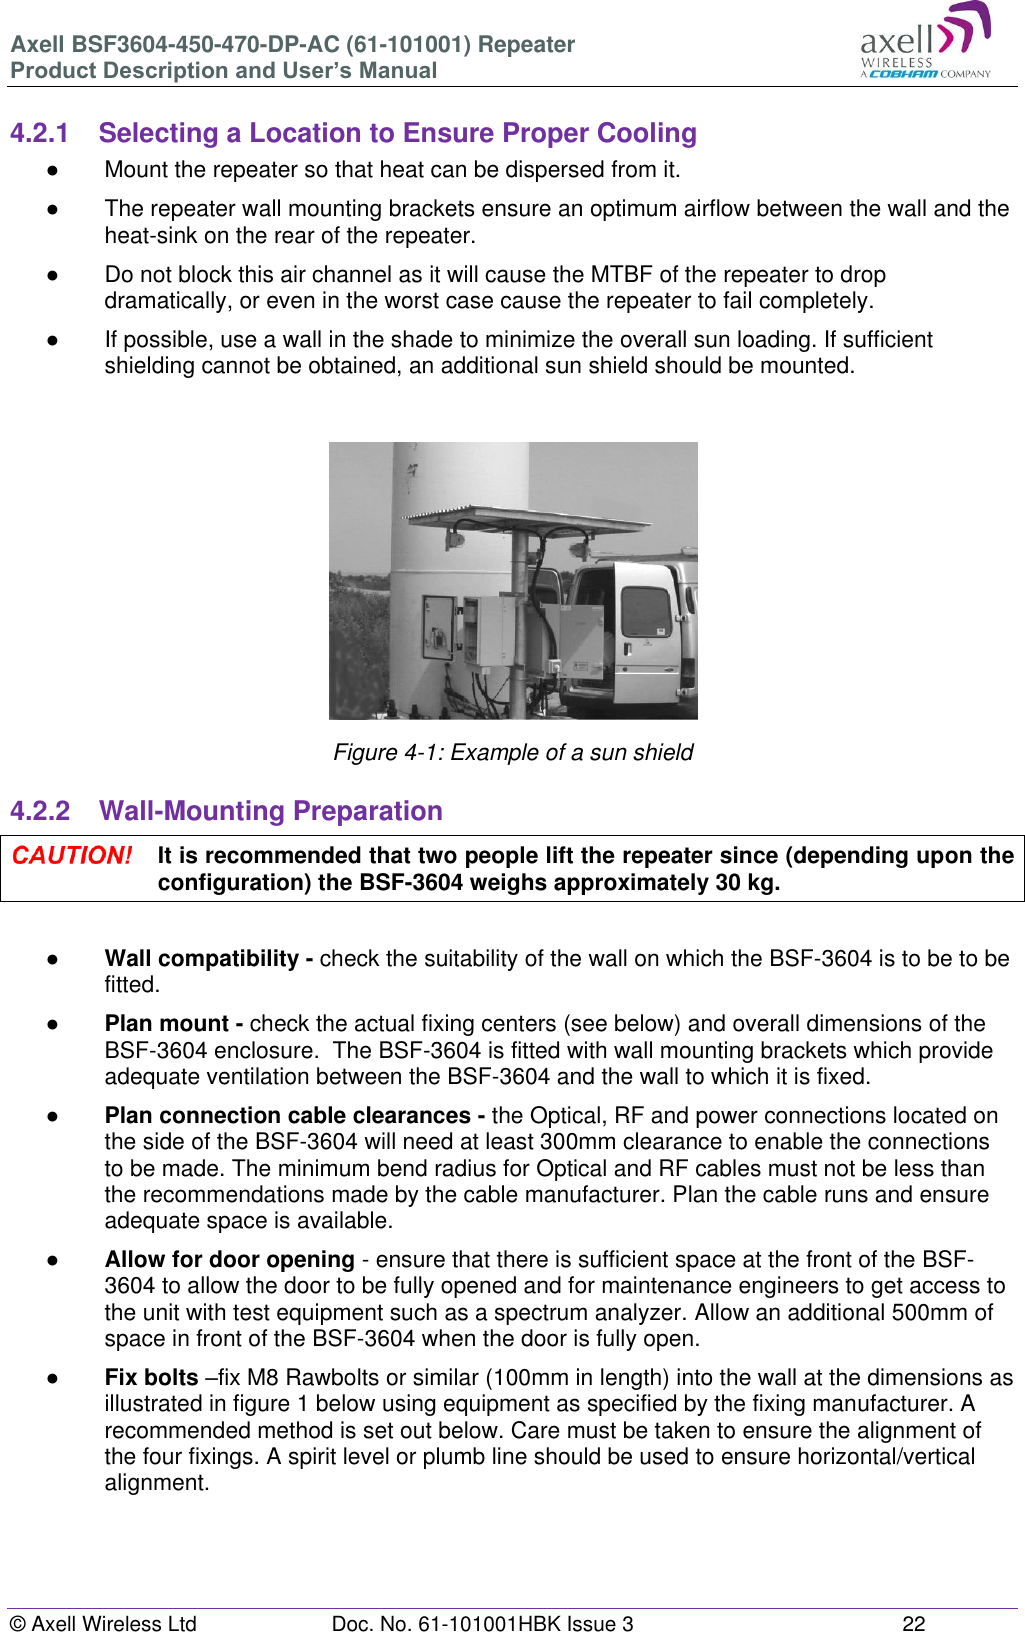 Axell BSF3604-450-470-DP-AC (61-101001) Repeater Product Description and User’s Manual © Axell Wireless Ltd  Doc. No. 61-101001HBK Issue 3  22   4.2.1  Selecting a Location to Ensure Proper Cooling ●  Mount the repeater so that heat can be dispersed from it.  ● The repeater wall mounting brackets ensure an optimum airflow between the wall and the heat-sink on the rear of the repeater.  ●  Do not block this air channel as it will cause the MTBF of the repeater to drop dramatically, or even in the worst case cause the repeater to fail completely.  ●  If possible, use a wall in the shade to minimize the overall sun loading. If sufficient shielding cannot be obtained, an additional sun shield should be mounted.    Figure 4-1: Example of a sun shield  4.2.2  Wall-Mounting Preparation  It is recommended that two people lift the repeater since (depending upon the configuration) the BSF-3604 weighs approximately 30 kg.  ● Wall compatibility - check the suitability of the wall on which the BSF-3604 is to be to be fitted.  ● Plan mount - check the actual fixing centers (see below) and overall dimensions of the BSF-3604 enclosure.  The BSF-3604 is fitted with wall mounting brackets which provide adequate ventilation between the BSF-3604 and the wall to which it is fixed. ● Plan connection cable clearances - the Optical, RF and power connections located on the side of the BSF-3604 will need at least 300mm clearance to enable the connections to be made. The minimum bend radius for Optical and RF cables must not be less than the recommendations made by the cable manufacturer. Plan the cable runs and ensure adequate space is available. ● Allow for door opening - ensure that there is sufficient space at the front of the BSF-3604 to allow the door to be fully opened and for maintenance engineers to get access to the unit with test equipment such as a spectrum analyzer. Allow an additional 500mm of space in front of the BSF-3604 when the door is fully open. ● Fix bolts –fix M8 Rawbolts or similar (100mm in length) into the wall at the dimensions as illustrated in figure 1 below using equipment as specified by the fixing manufacturer. A recommended method is set out below. Care must be taken to ensure the alignment of the four fixings. A spirit level or plumb line should be used to ensure horizontal/vertical alignment.     